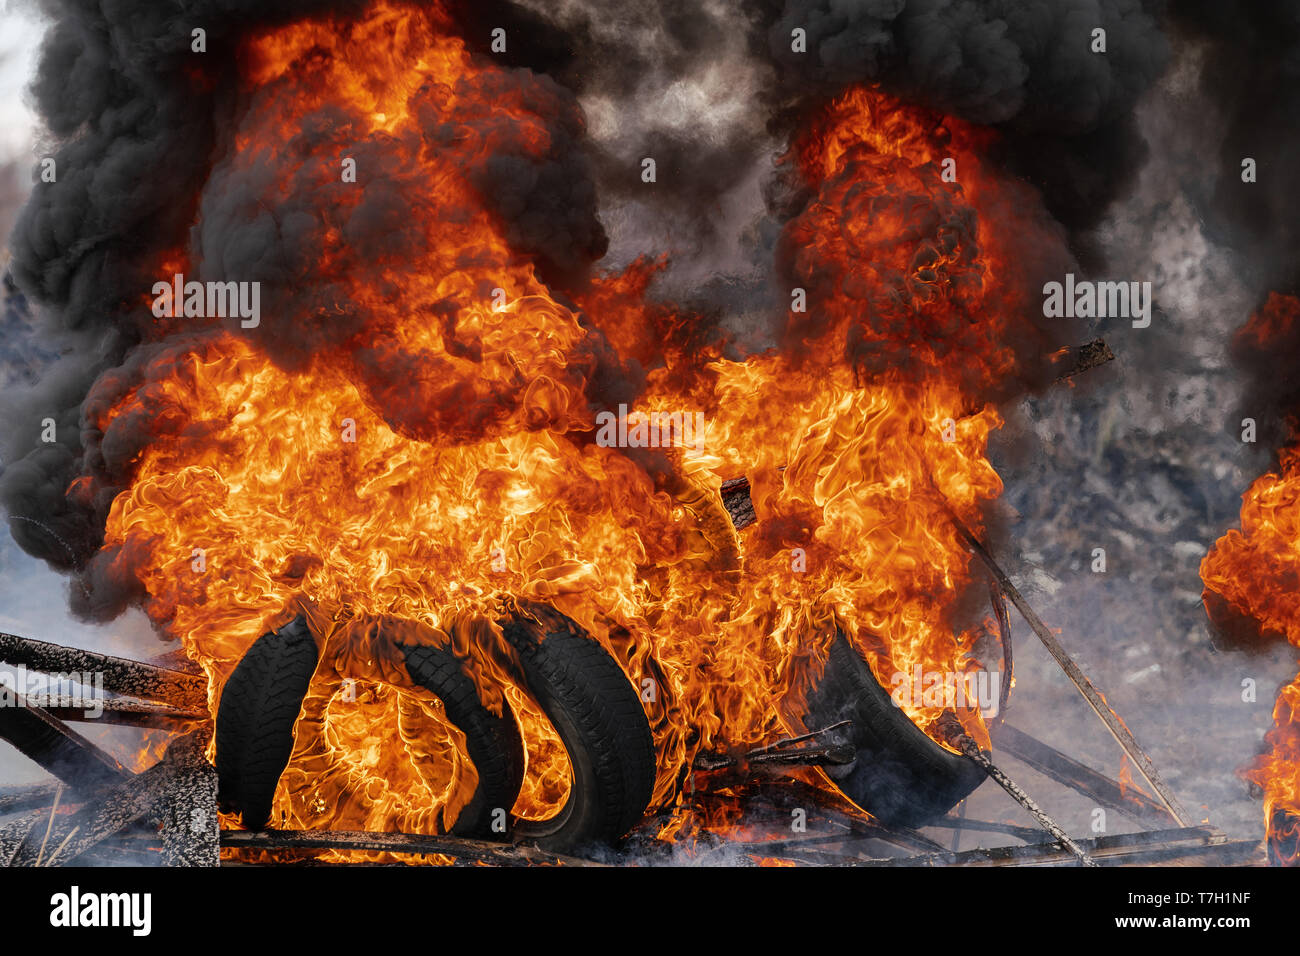 Burning automobile tires, strong flame of red fire and clouds of black smoke in sky. Selective focus, blur from strong fire. Stock Photo